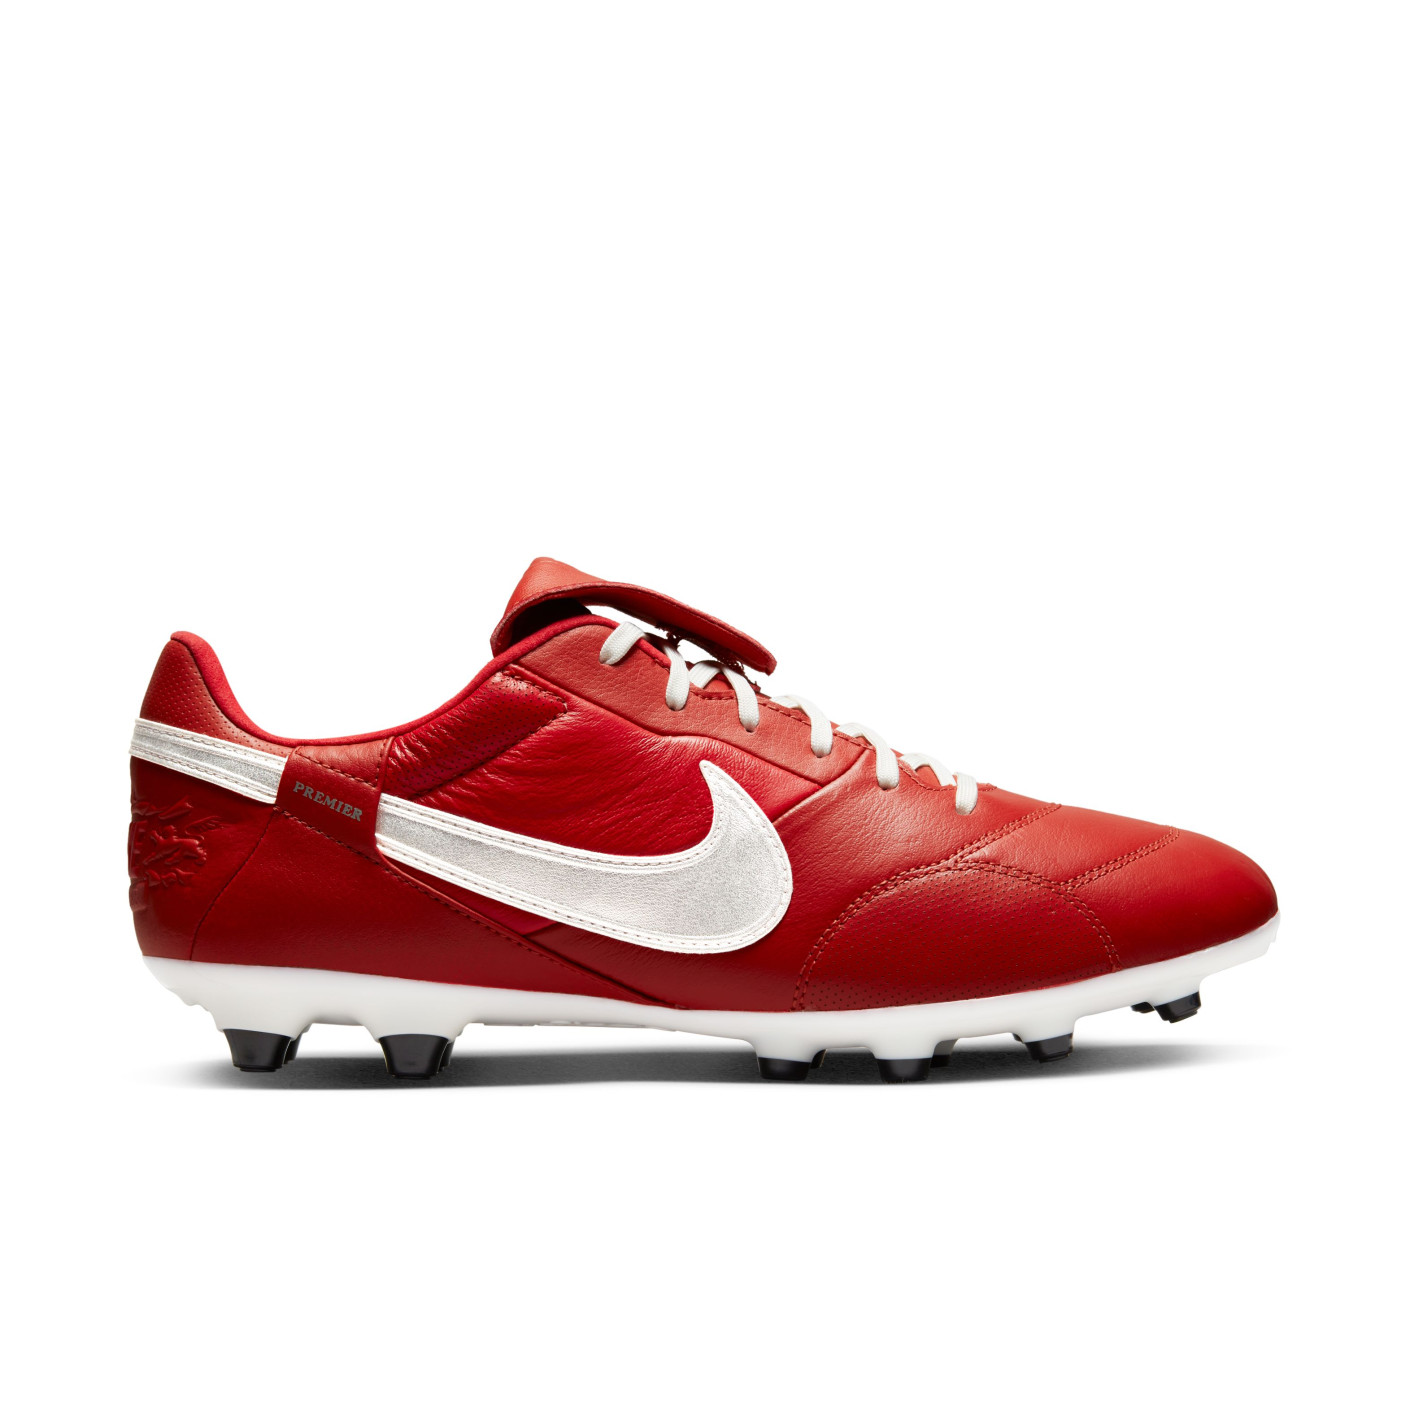 Nike Premier III Football Shoes Grass Dark Red Silver Red